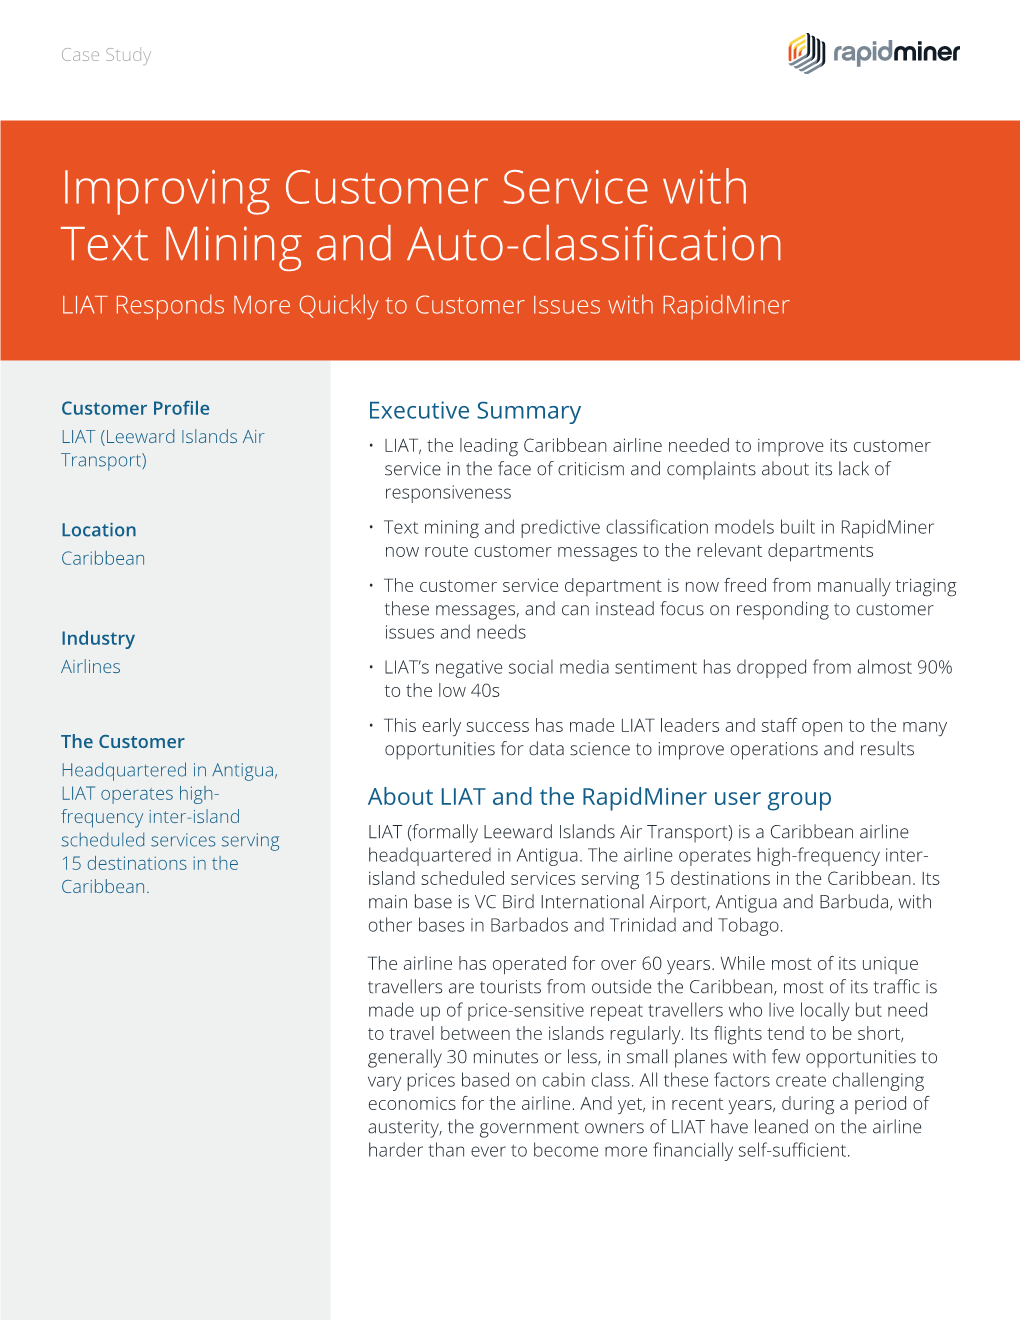 Improving Customer Service with Text Mining and Auto-Classification LIAT Responds More Quickly to Customer Issues with Rapidminer